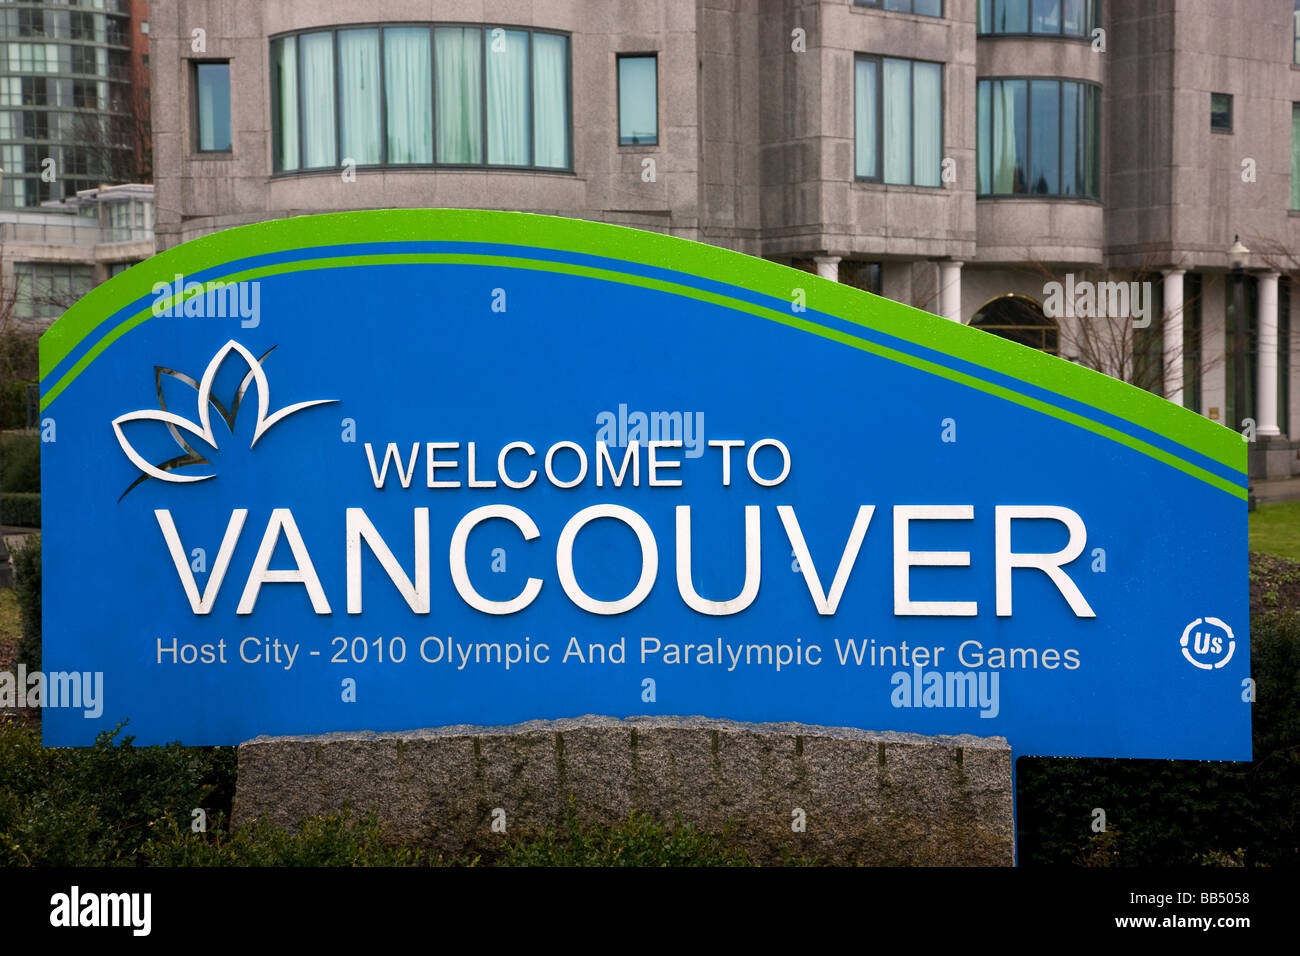 Welcome sign for the host city of the 2010 Winter Olympics Vancouver British Columbia Canada Stock Photo